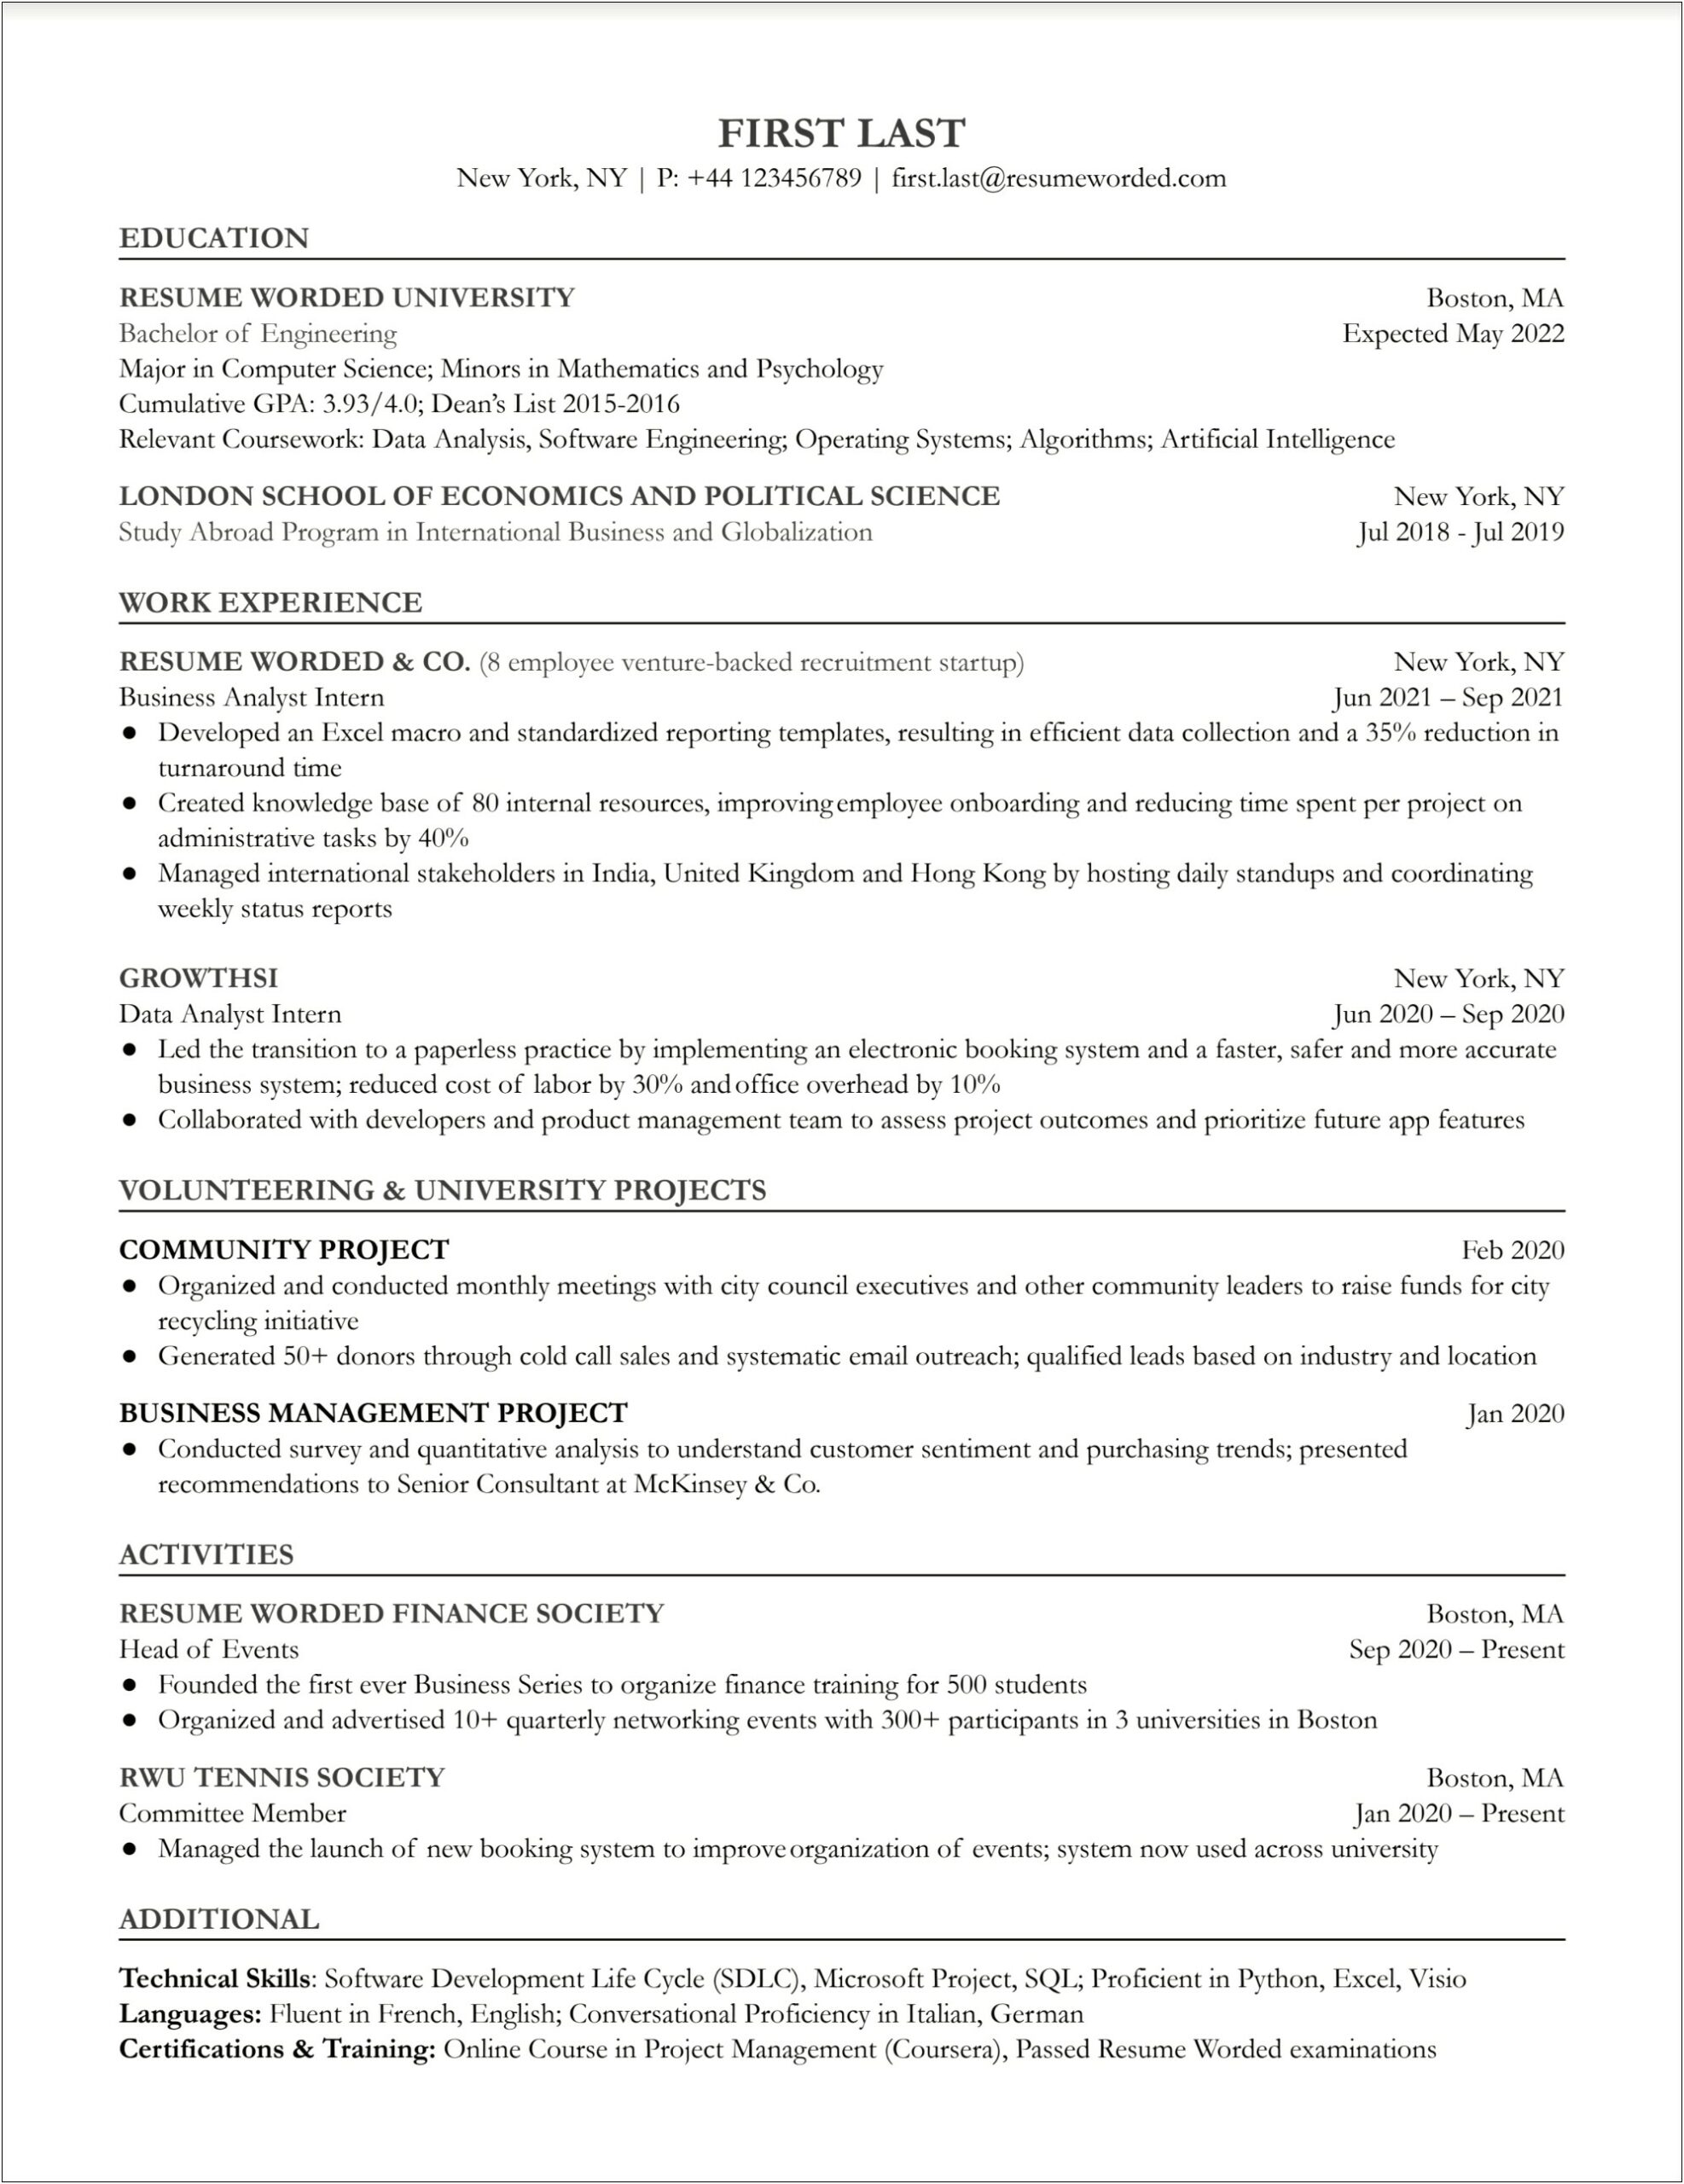 Help Desk To Jr Business Analyst Resume Examples